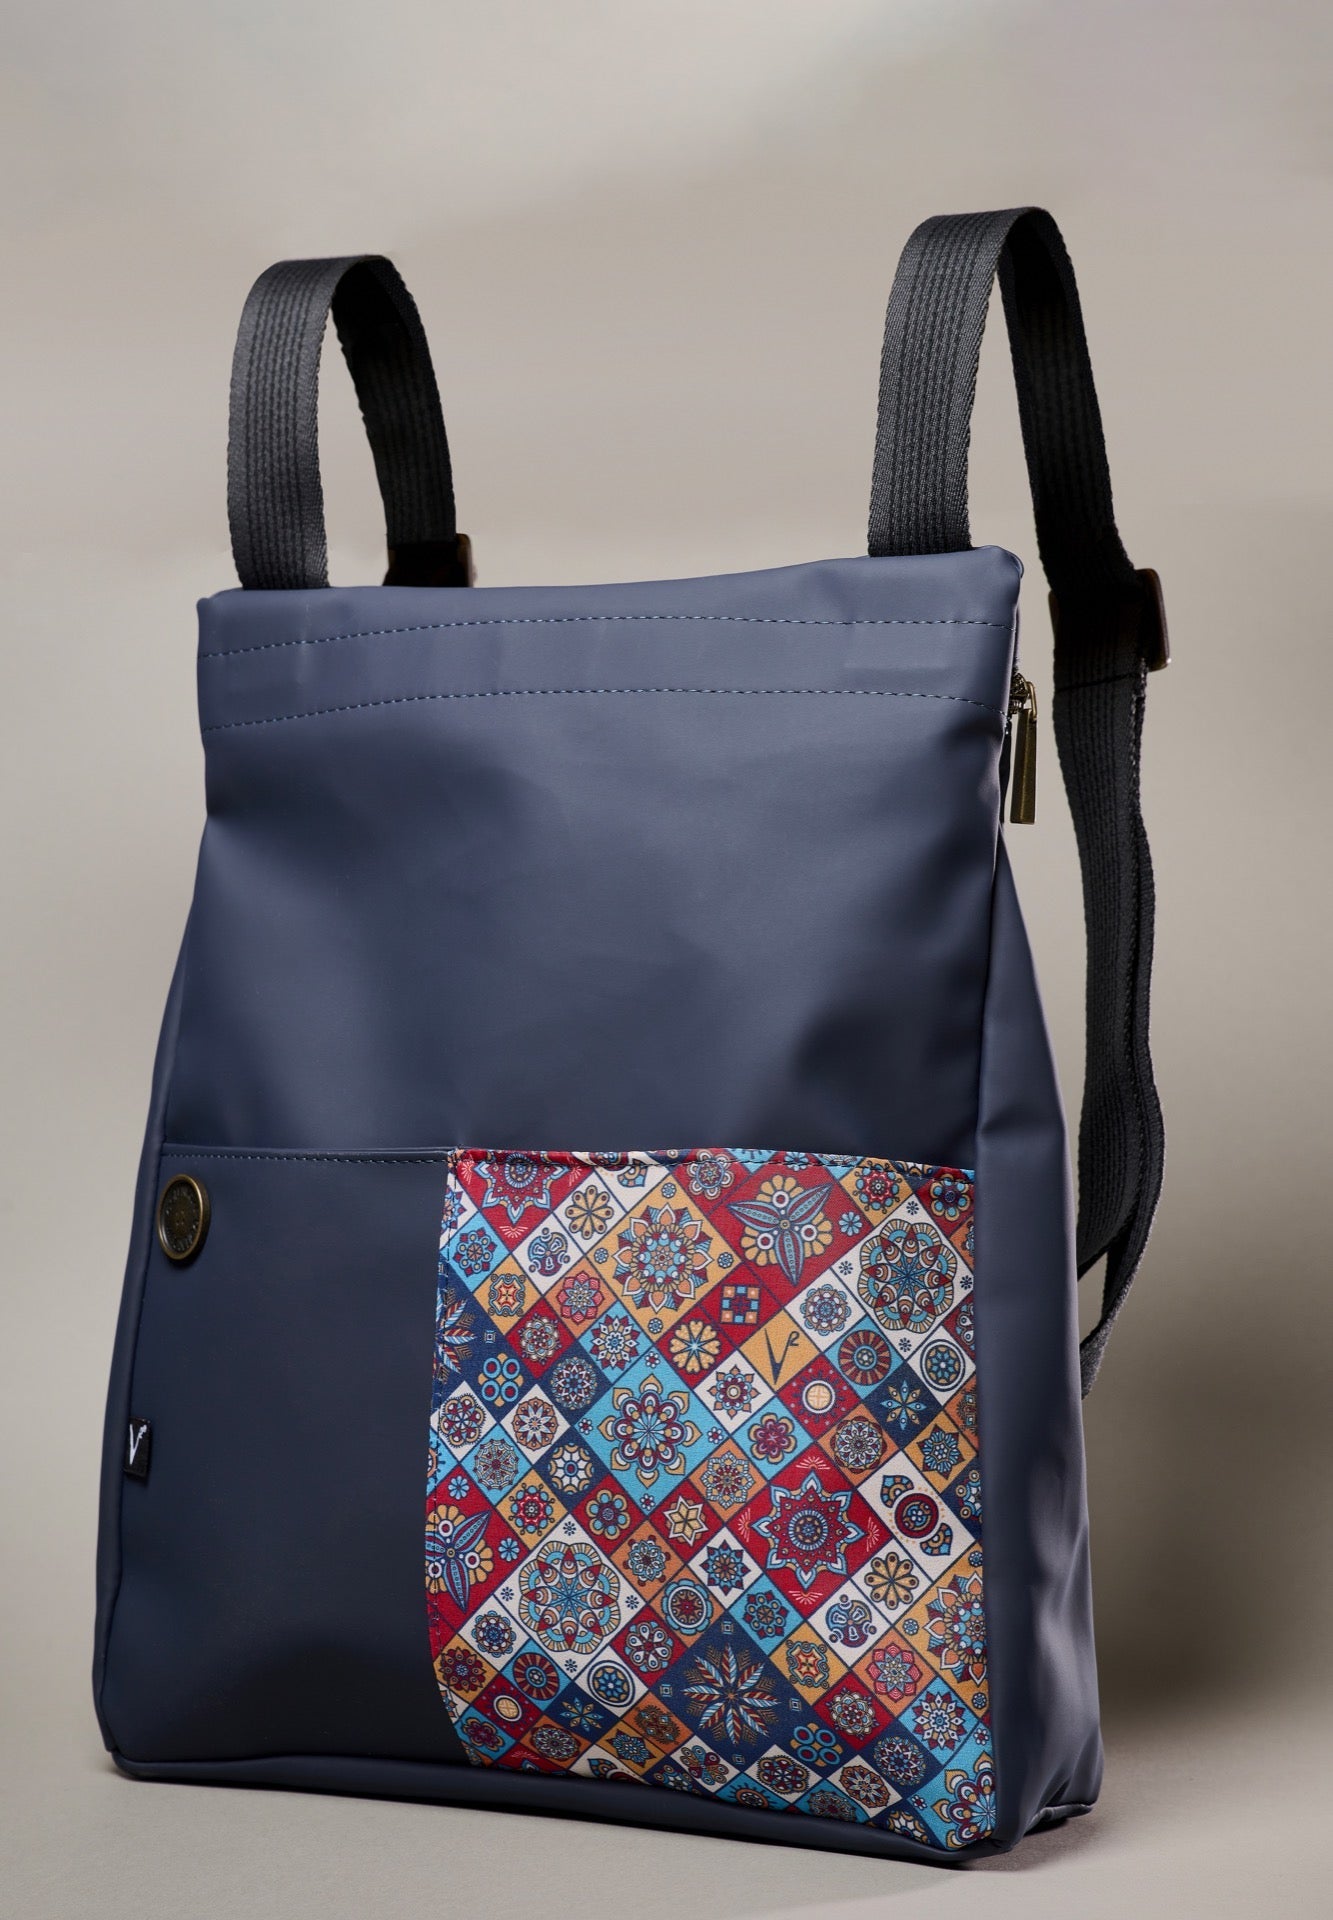 V2 x Mirantico - Blue Memo Bag Backpack with Pocket in Maiolica fabric